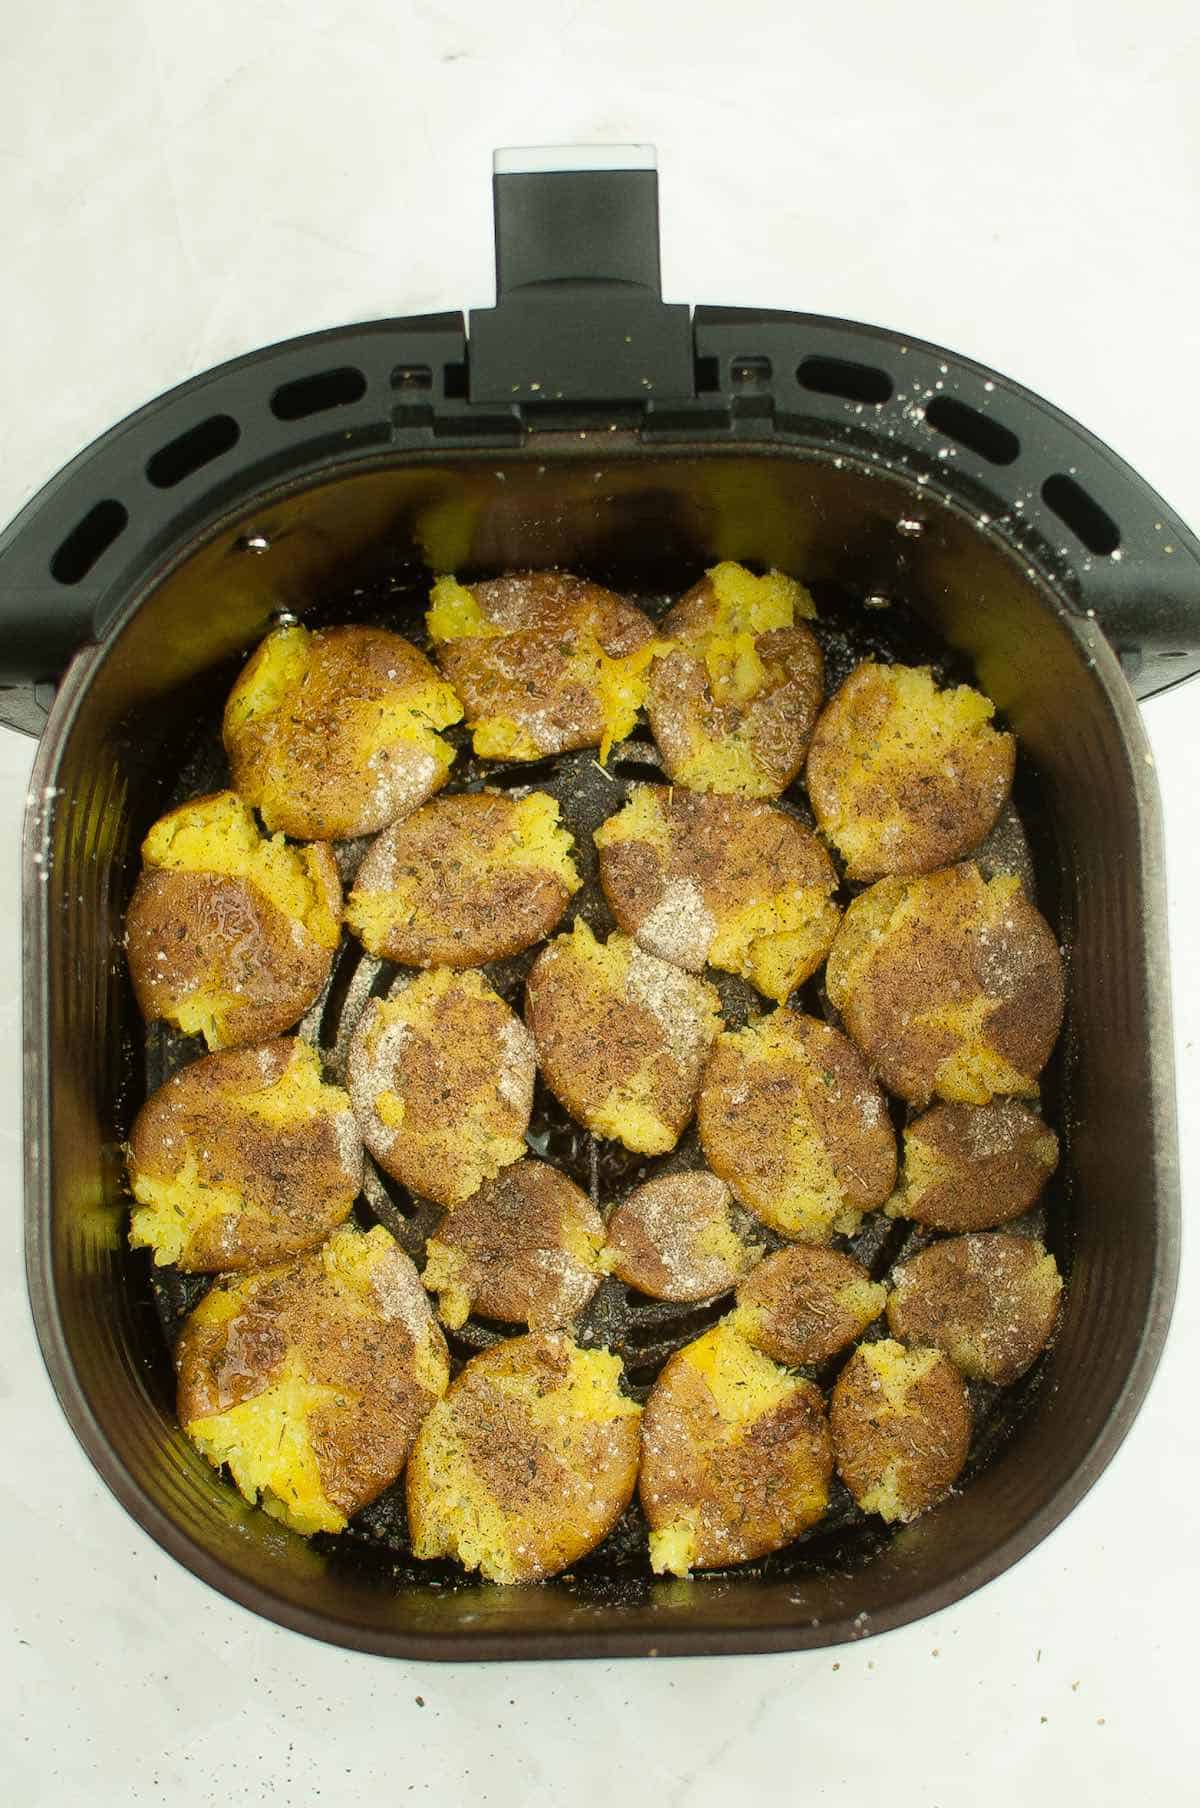 Smashed potatoes brushed with olive oil in an air fryer basket.